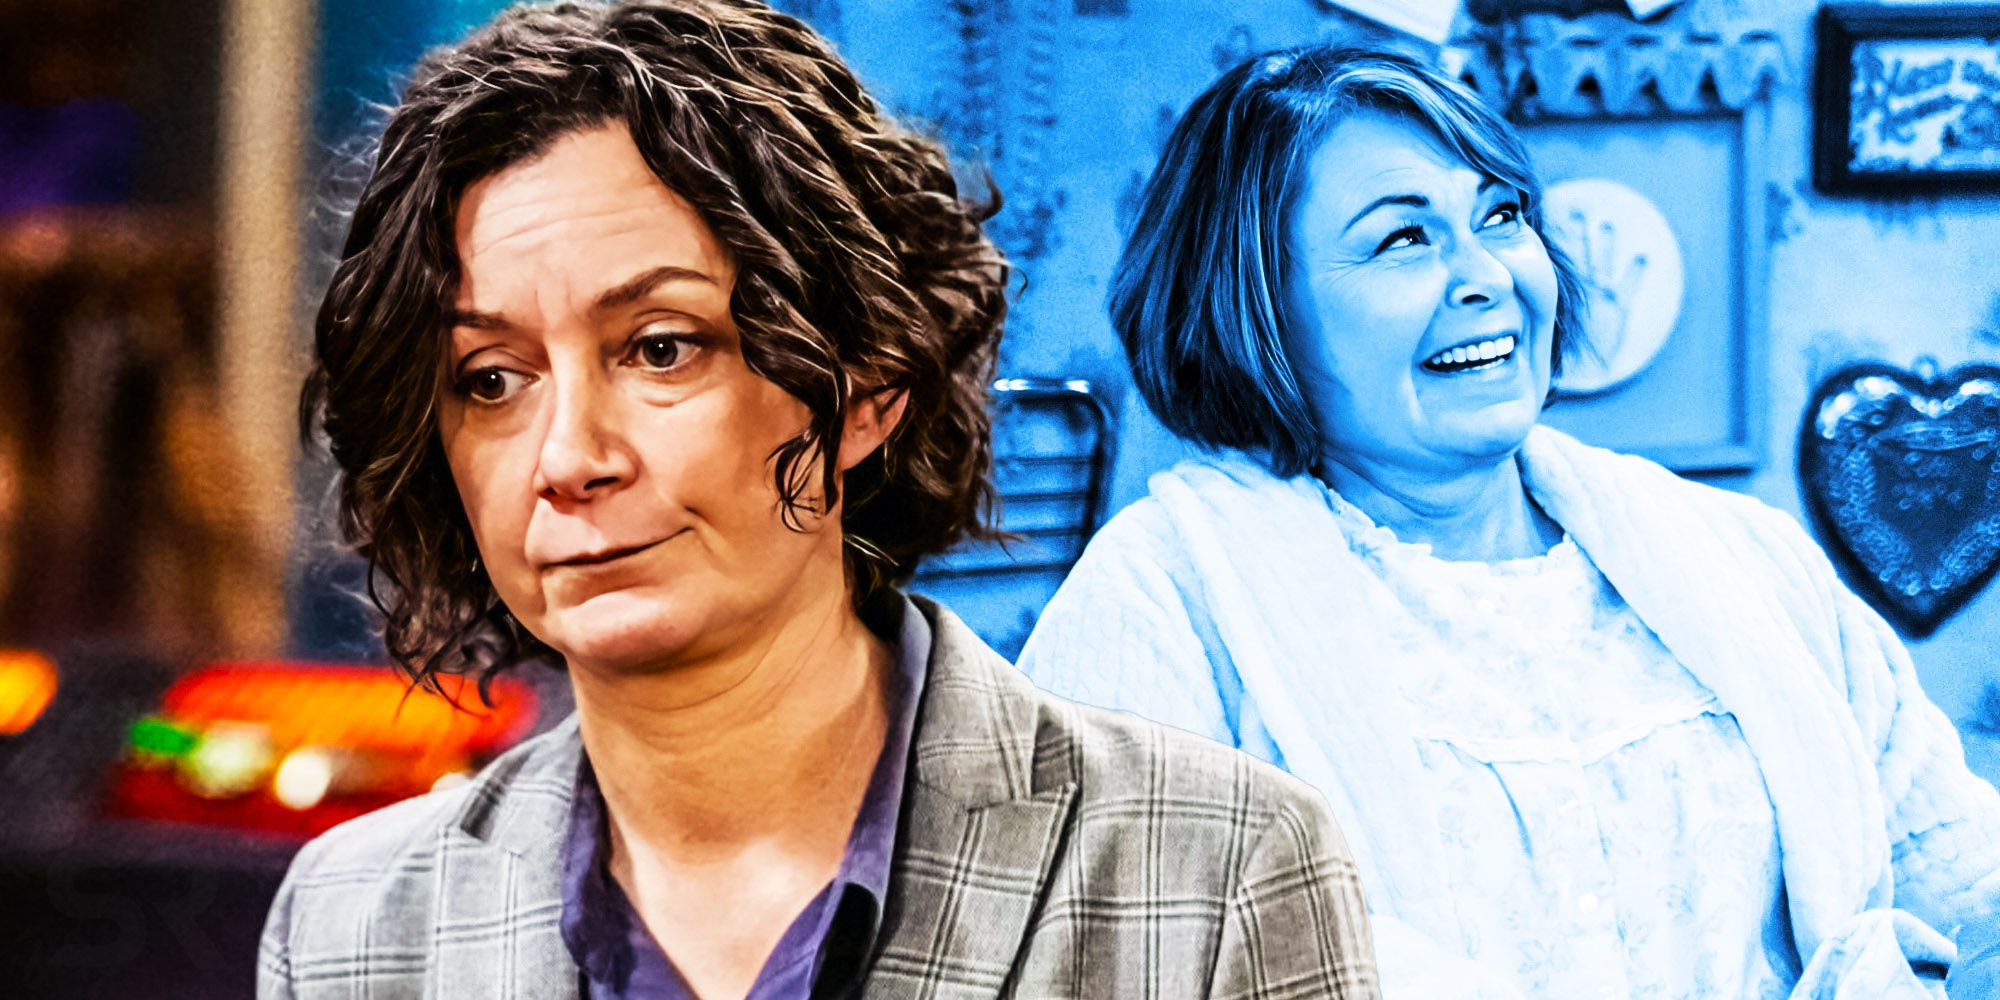 Custom image of Roseanne laughing in Roseanne season 10 and Darlene scowling in The Conners